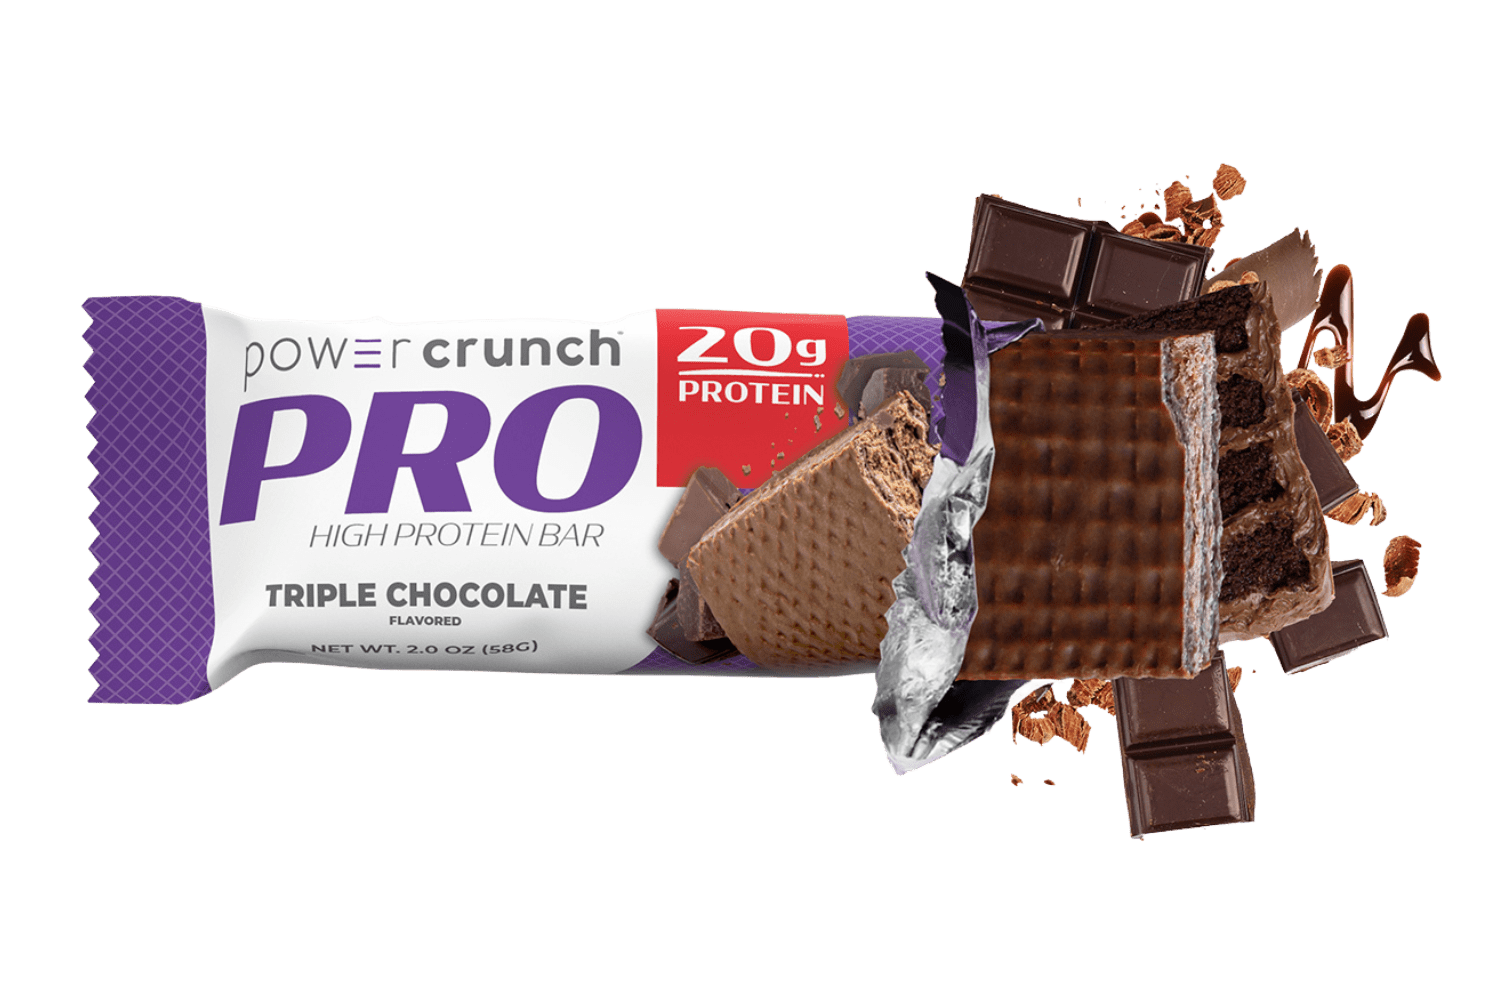 Power Crunch PRO Triple Chocolate 20g protein bars pictured with Triple Chocolate flavor explosion